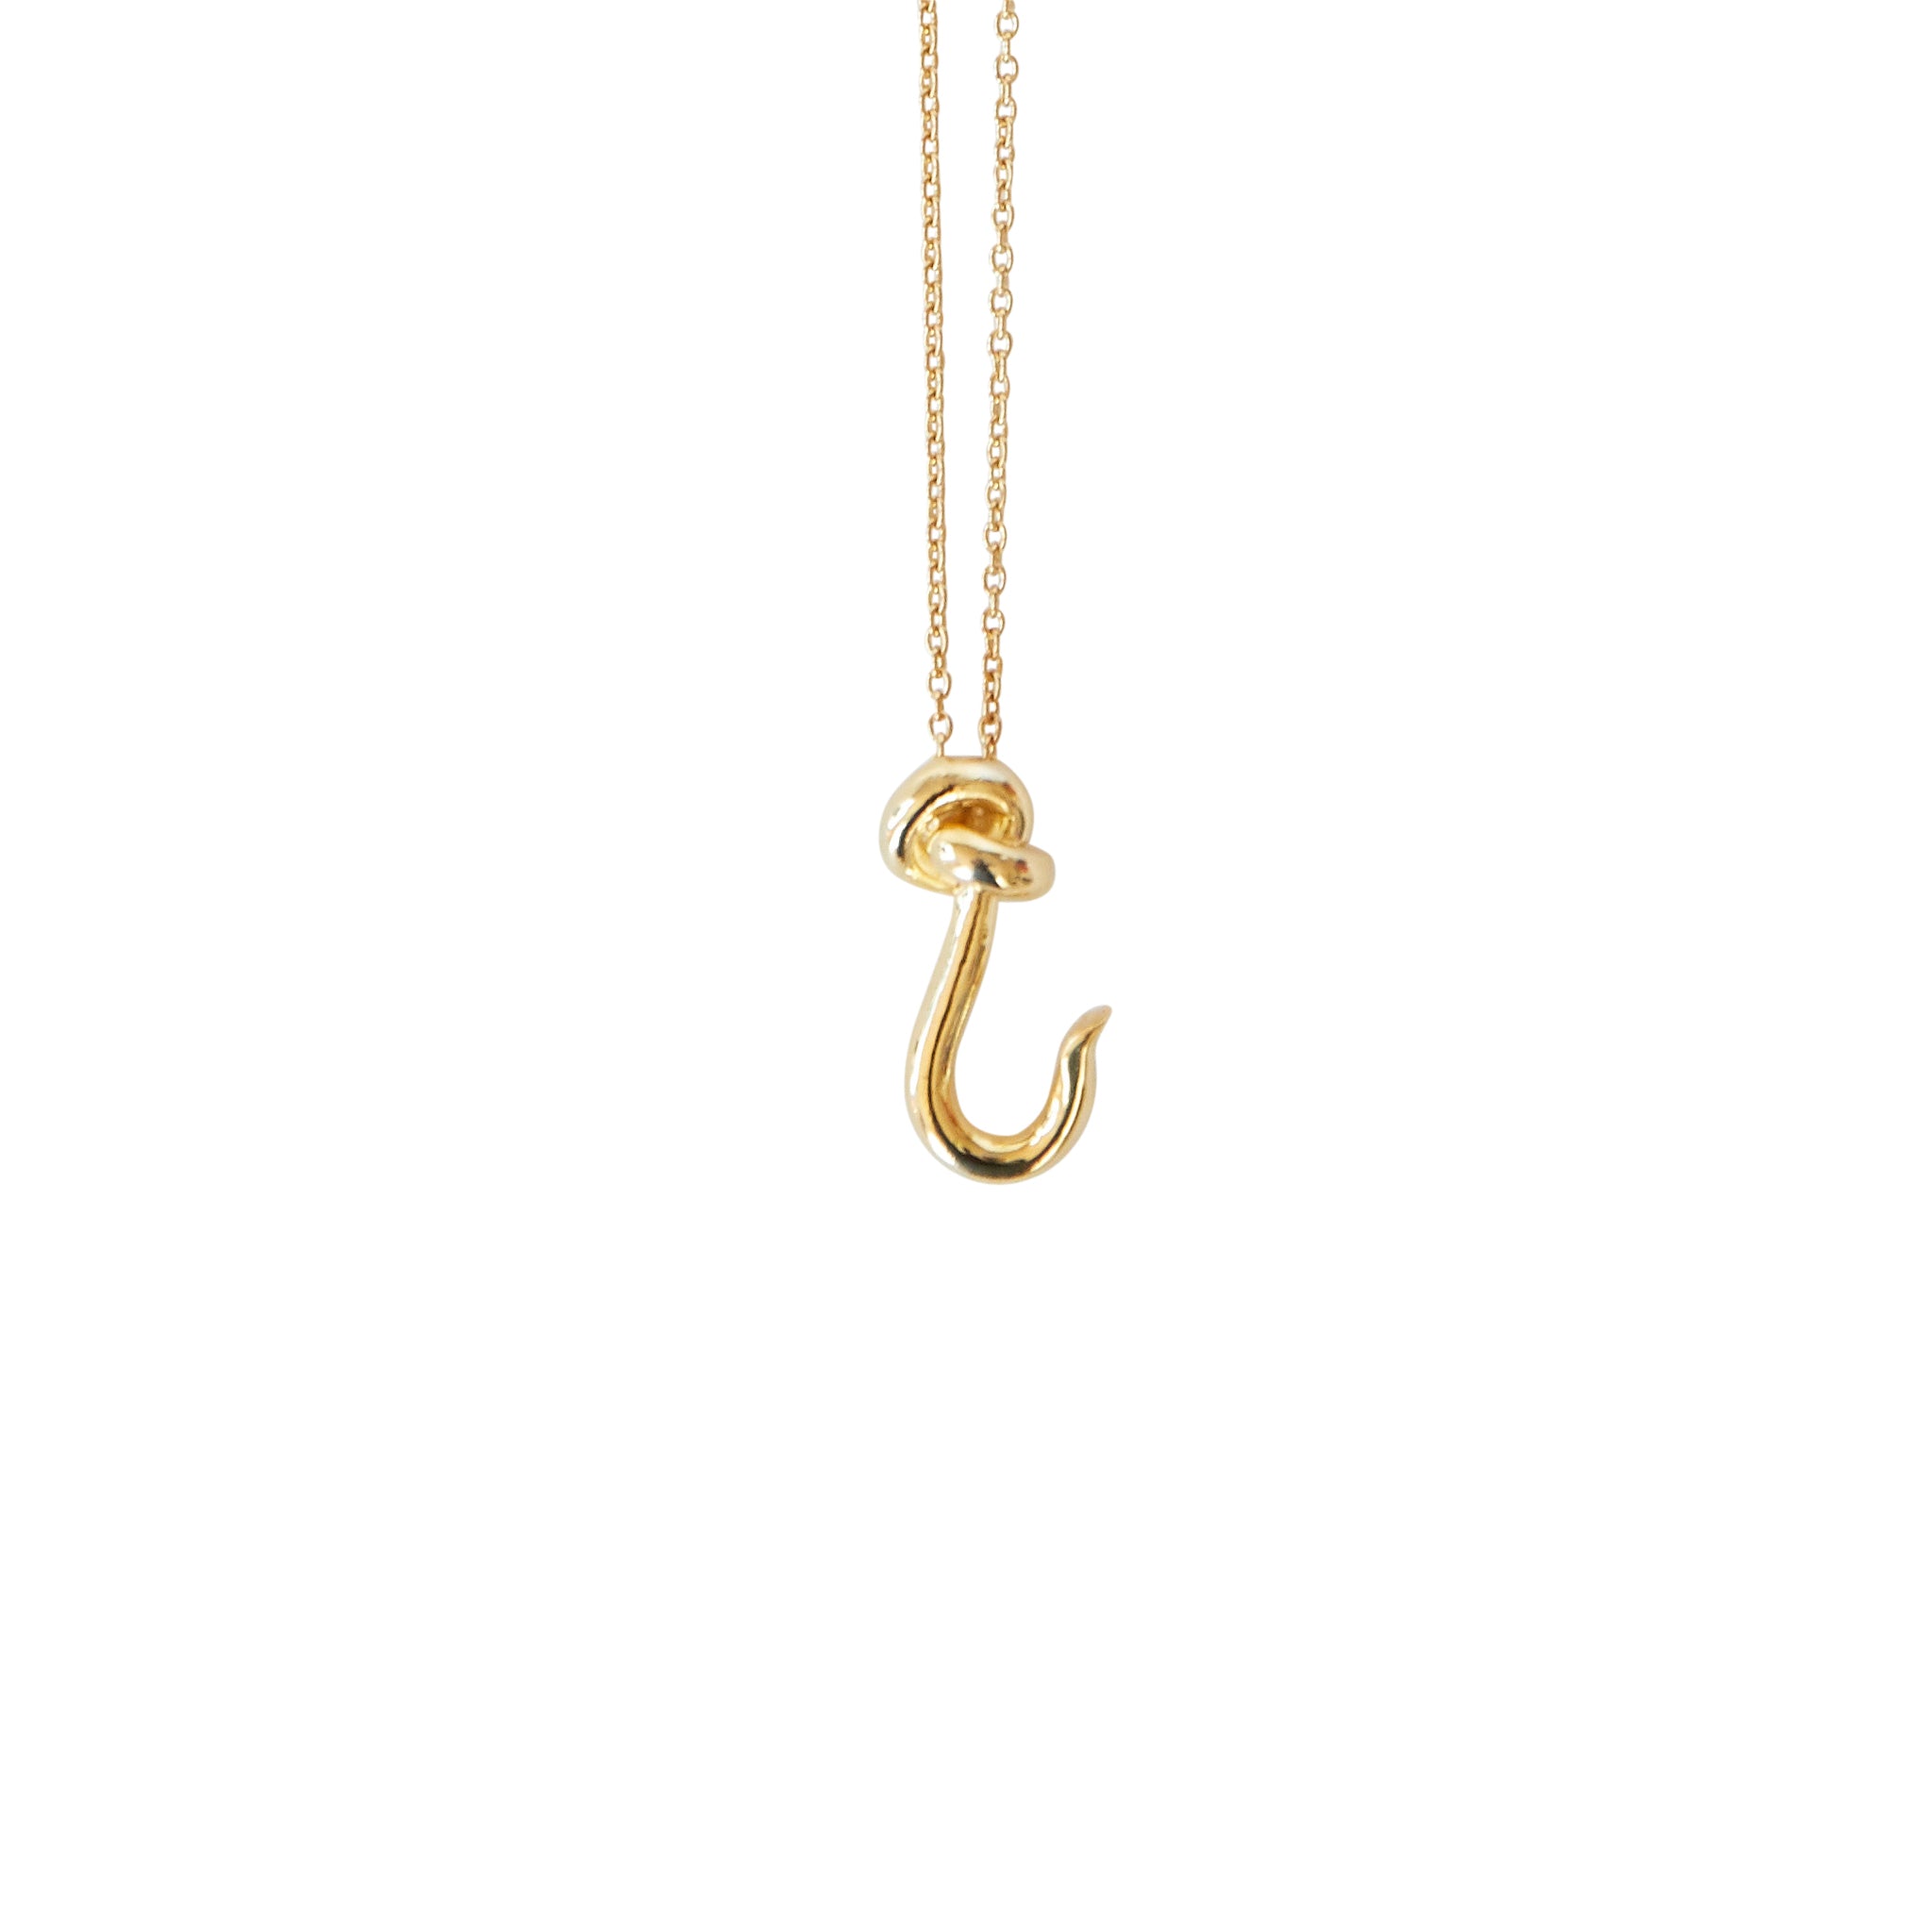 Necklace with Baby Fish Hook Pendant in Gold